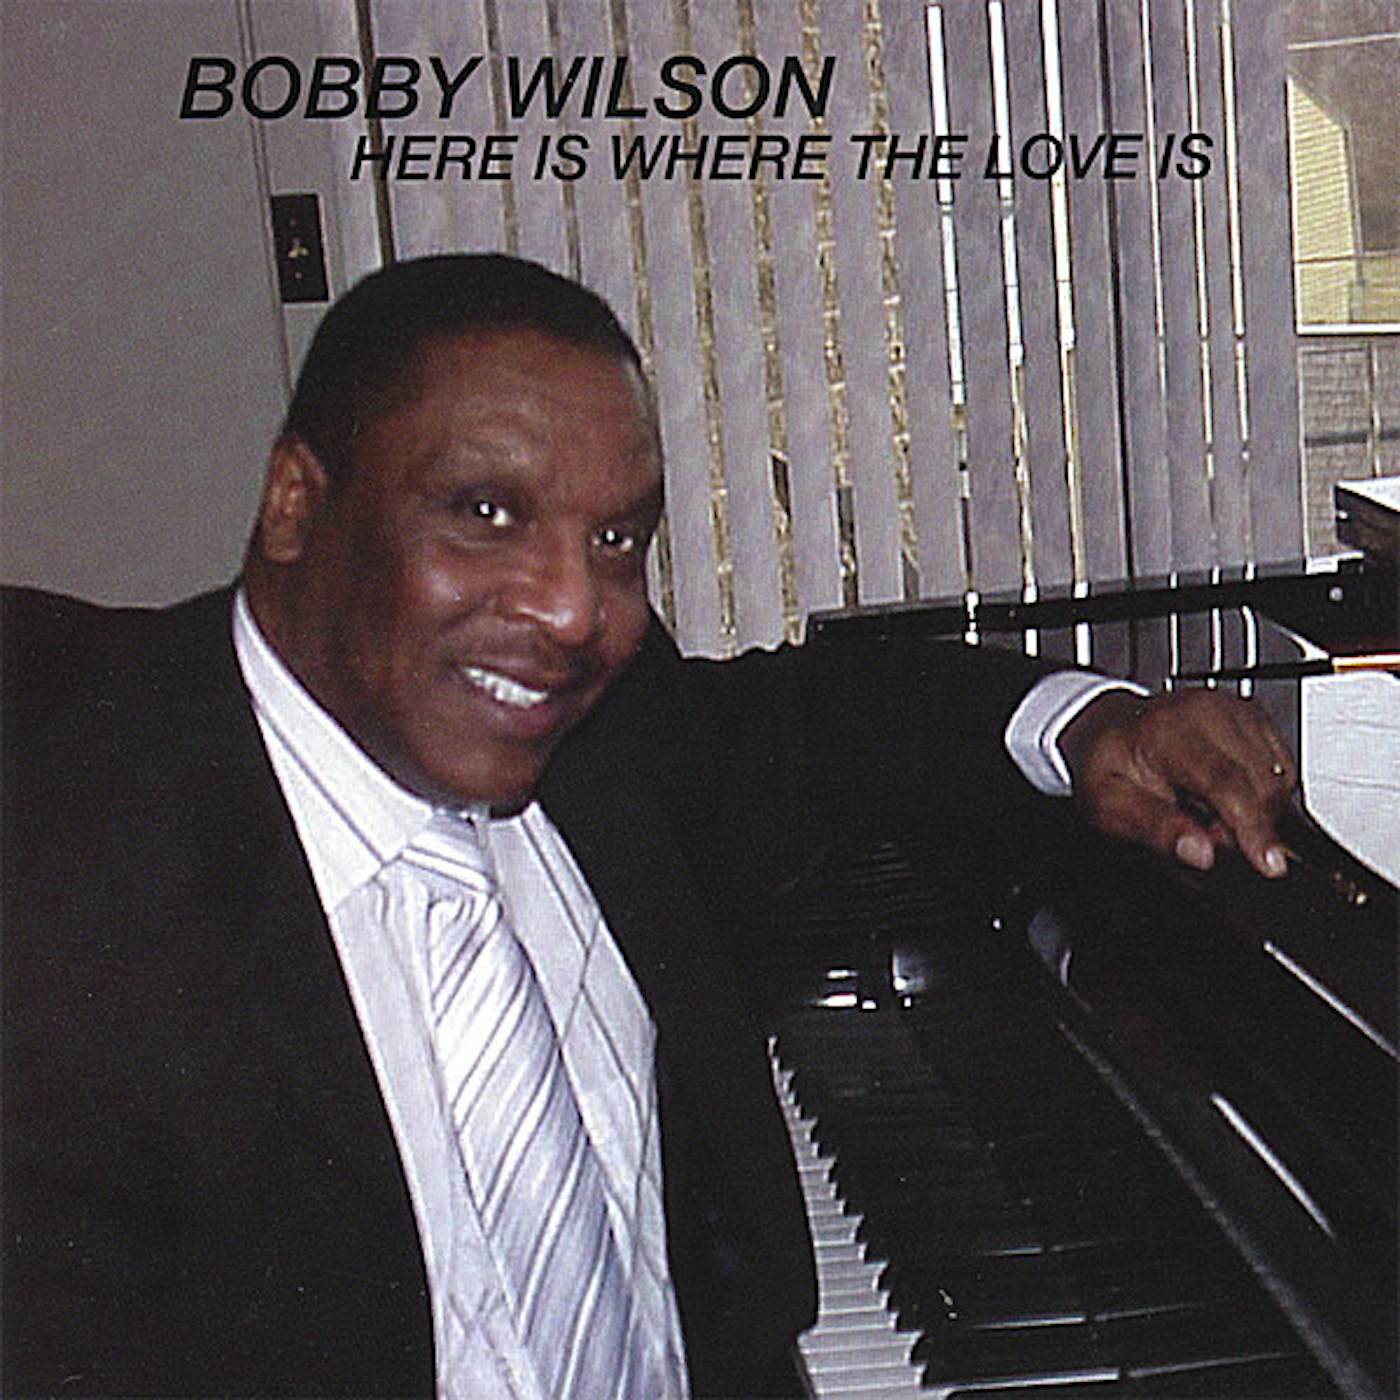 Bobby Wilson HERE IS WHERE THE LOVE IS CD